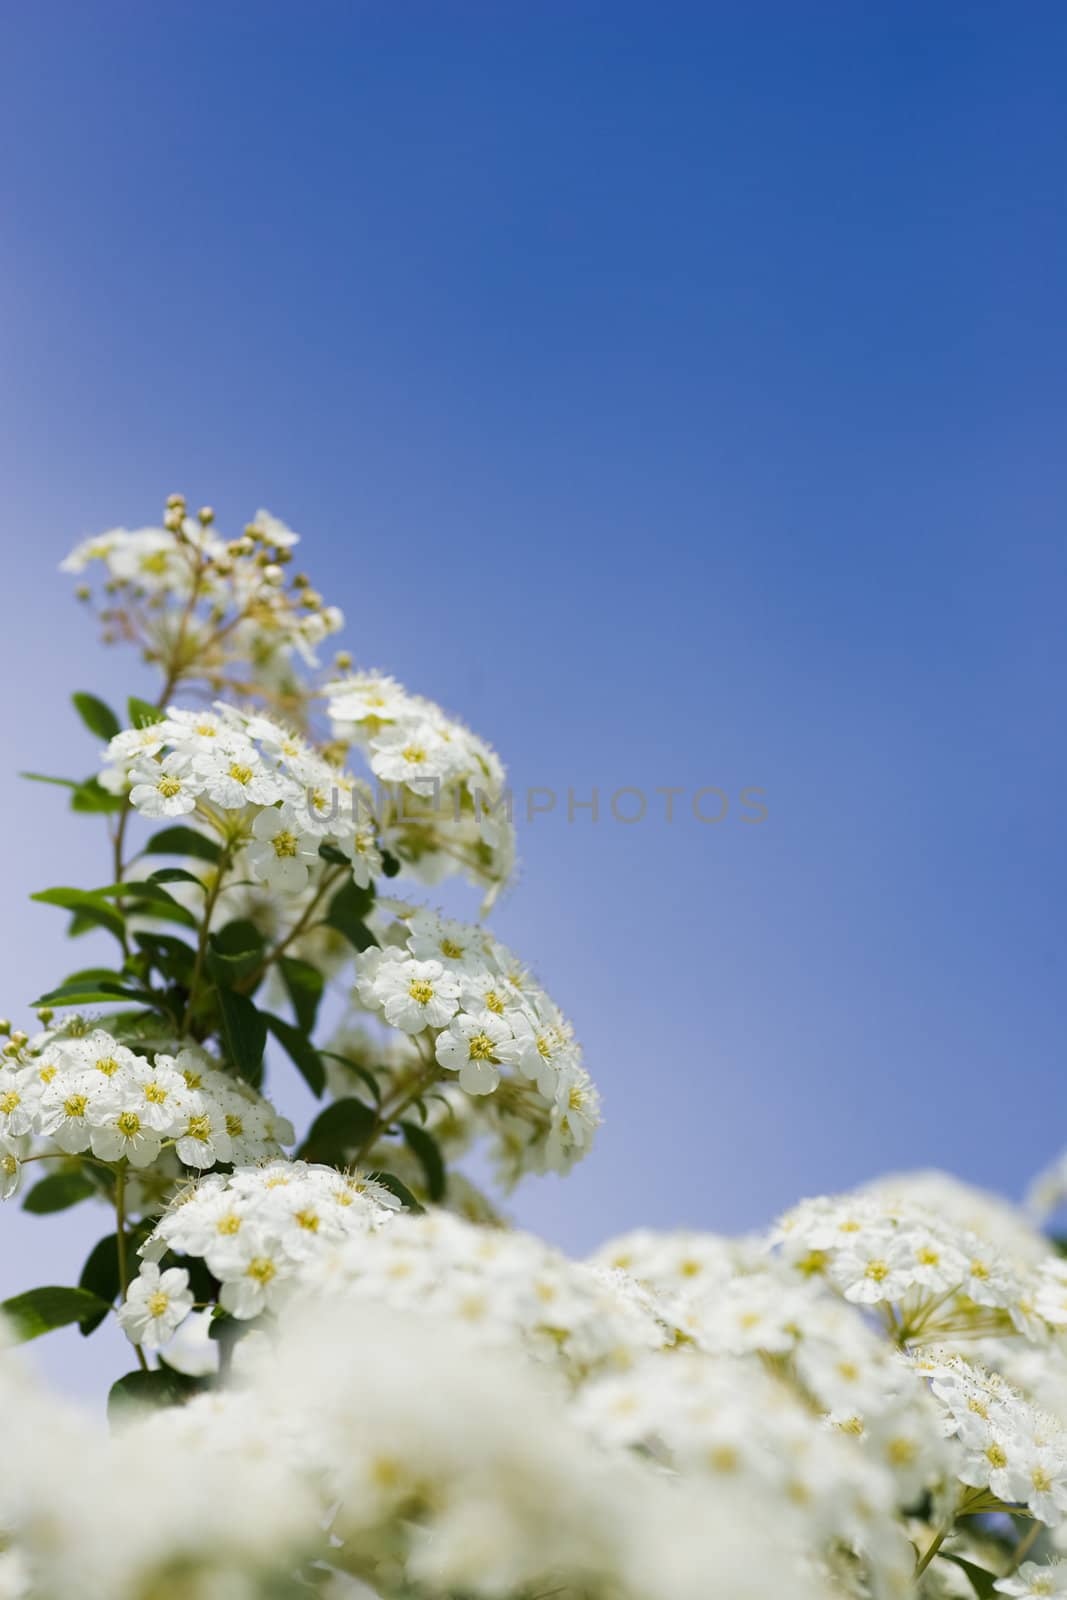 White crab apple blooms against a clear blue sky, with selective focus.